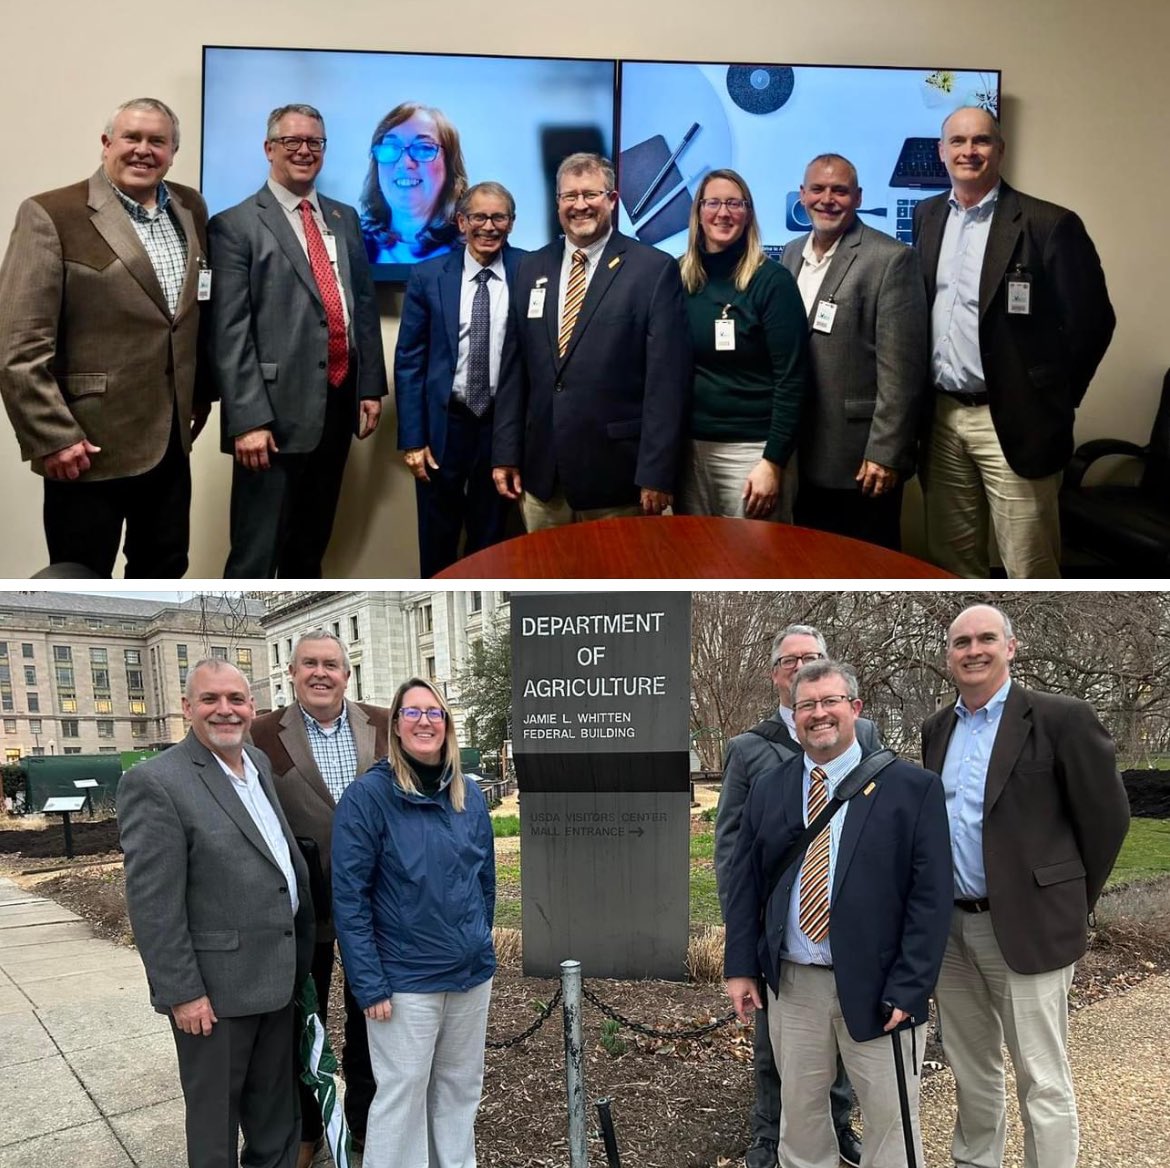 The NARRU board of directors had a very good meeting with Dr. Manjit Misra, Director of @USDA_NIFA today in Washington D.C. before their annual winter board meeting.  #NIFAimpacts